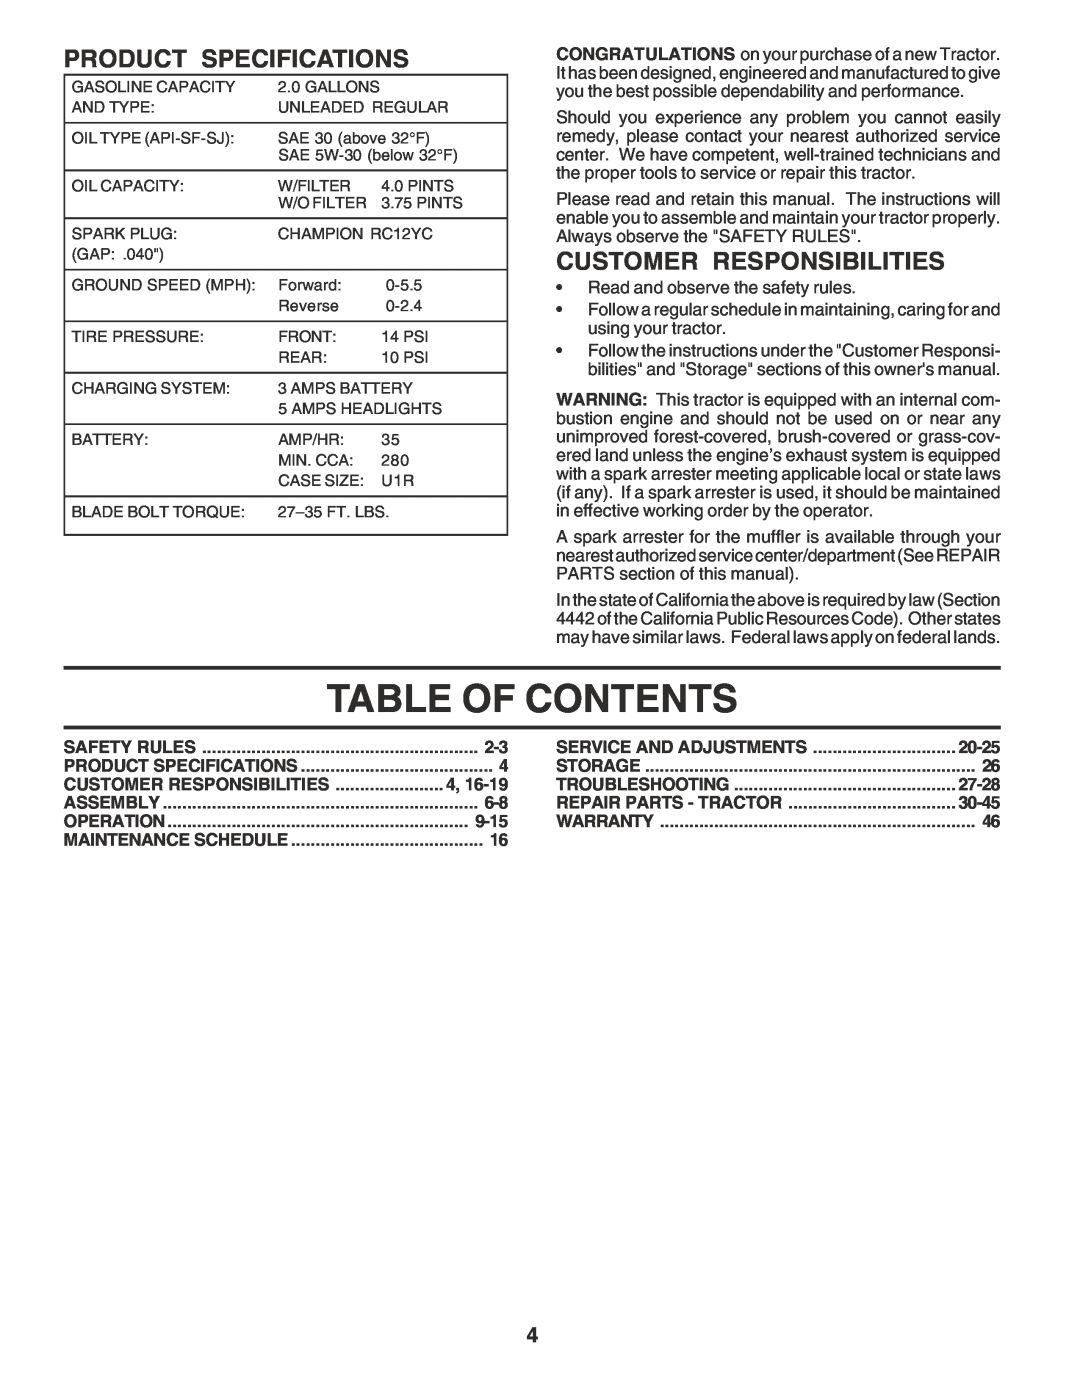 Poulan PR185H42STG owner manual Table Of Contents, Product Specifications, Customer Responsibilities 